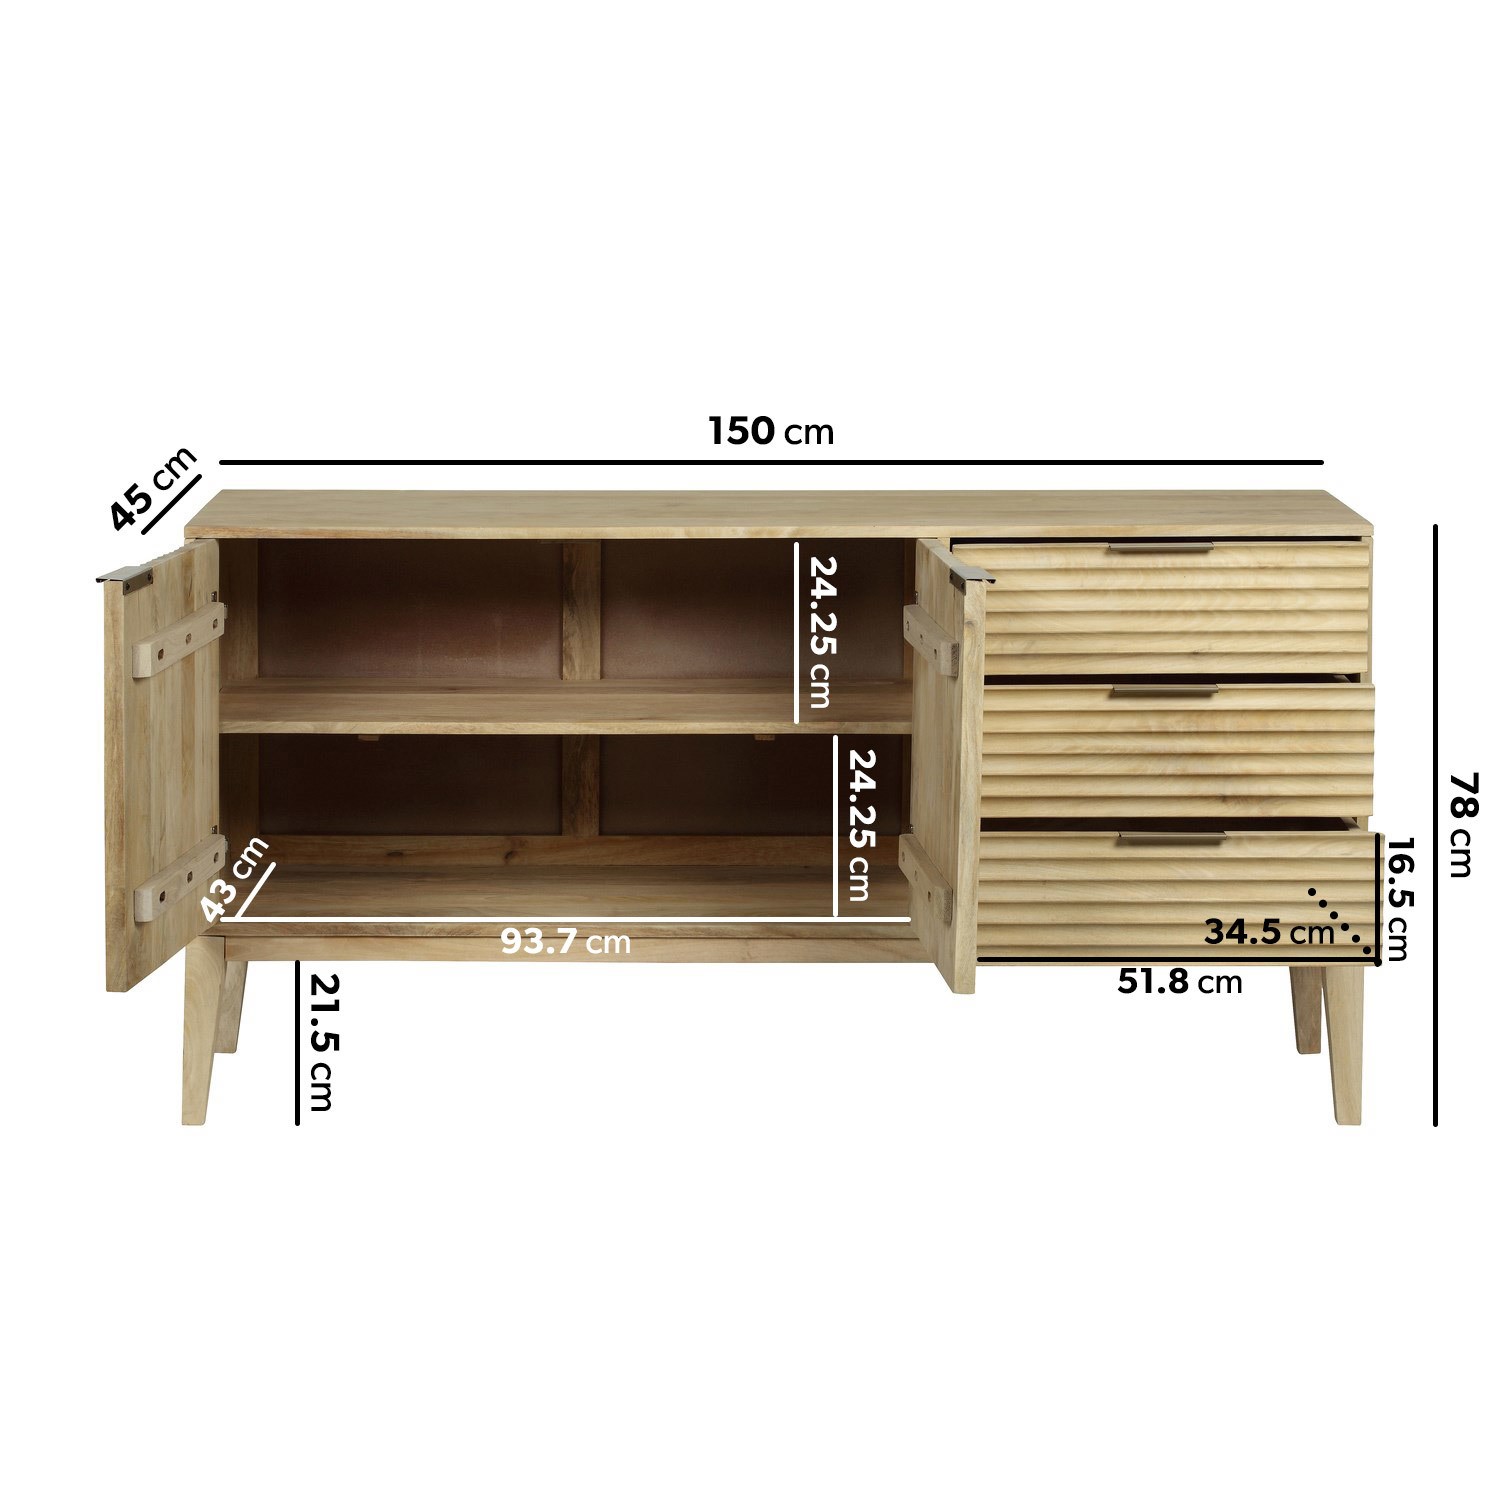 Read more about Large solid mango fluted wood sideboard with drawers linea